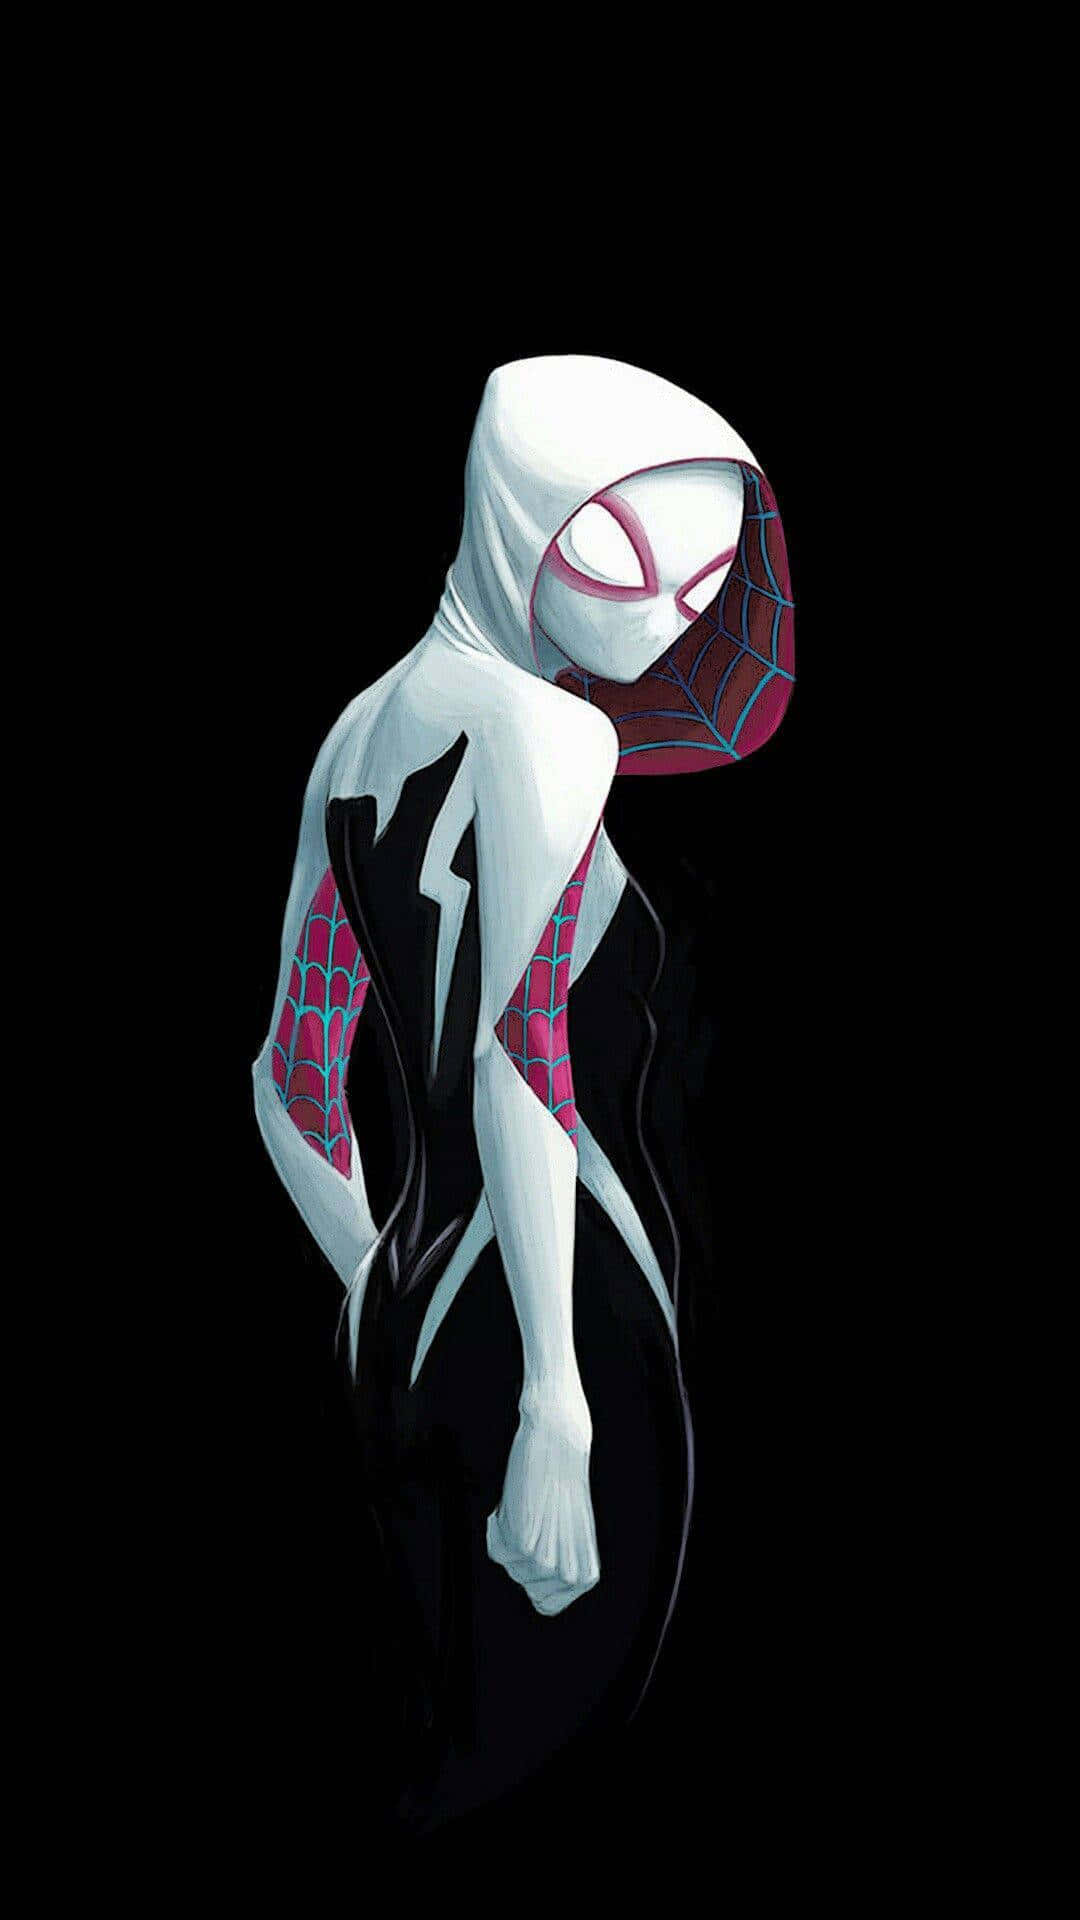 The daring Spider Gwen taking a leap of faith